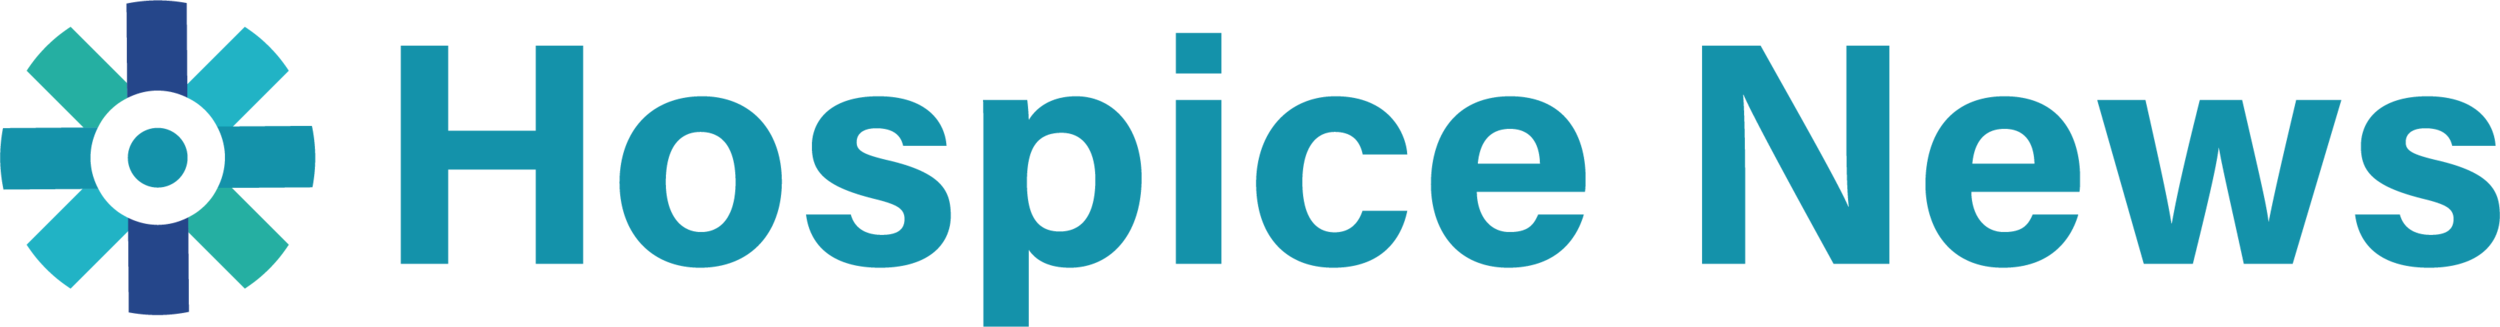 cropped-Hospice-News-Logo.png